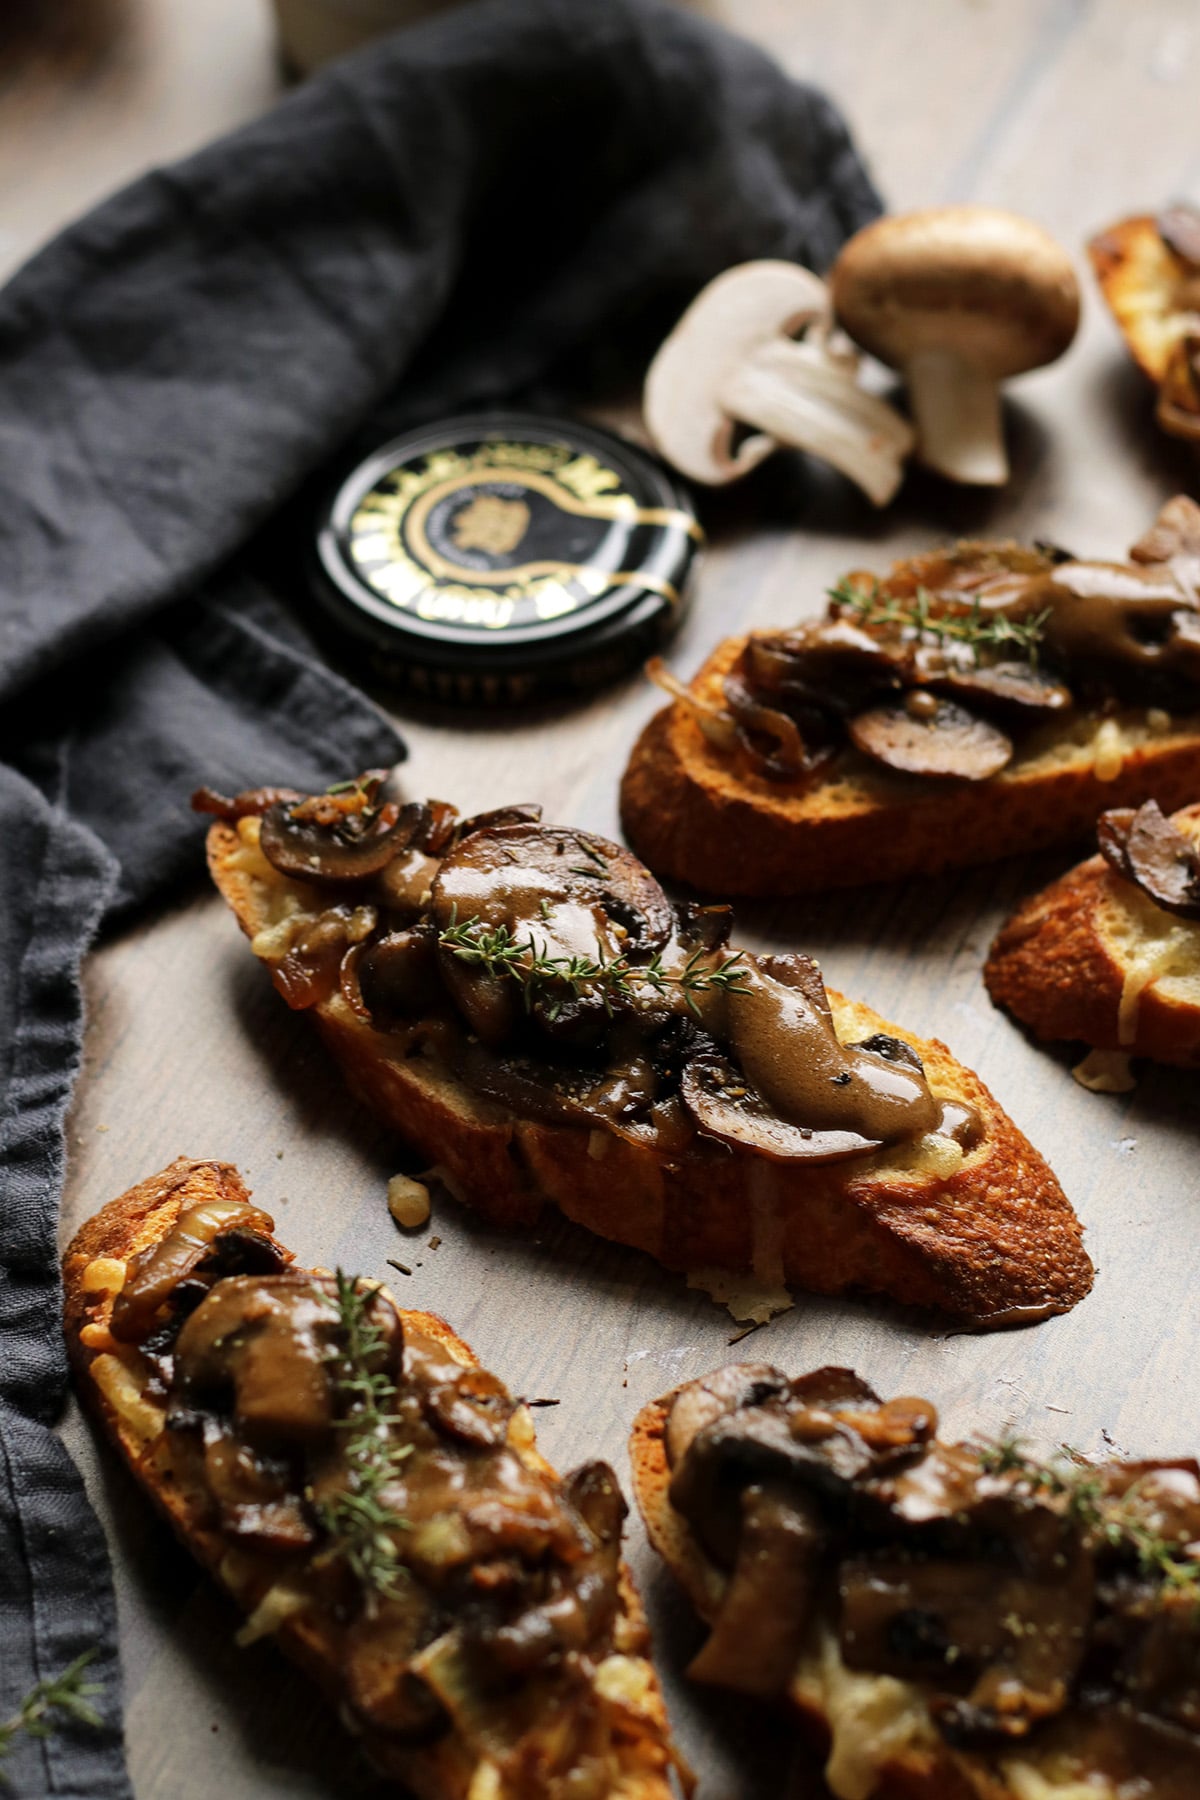 Vegan Crostini with Mushrooms and Caramelized Onions Next to a Mustard Lid.